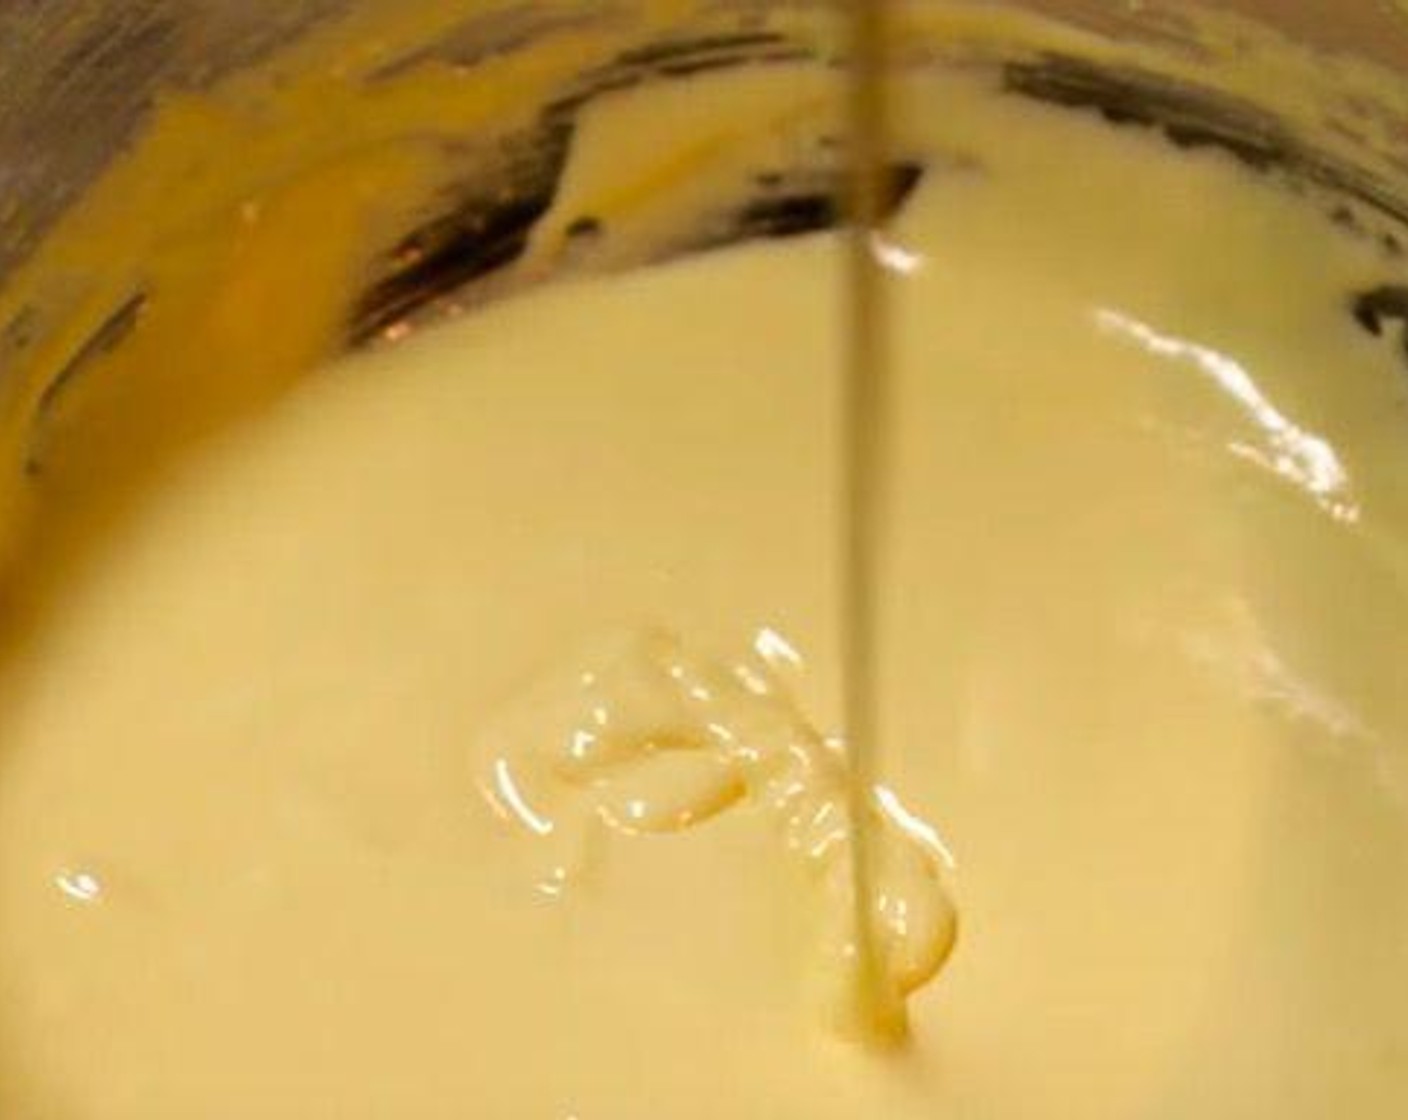 step 2 In a double boiler or bain marie, combine Eggs (6), Caster Sugar (1 cup) and Milk (2 Tbsp). While whisking constantly, cook for 8-10 minutes to cook the egg yolks. Mixture should be smooth but not all sugar will dissolve. This is okay. Set aside and let cool.